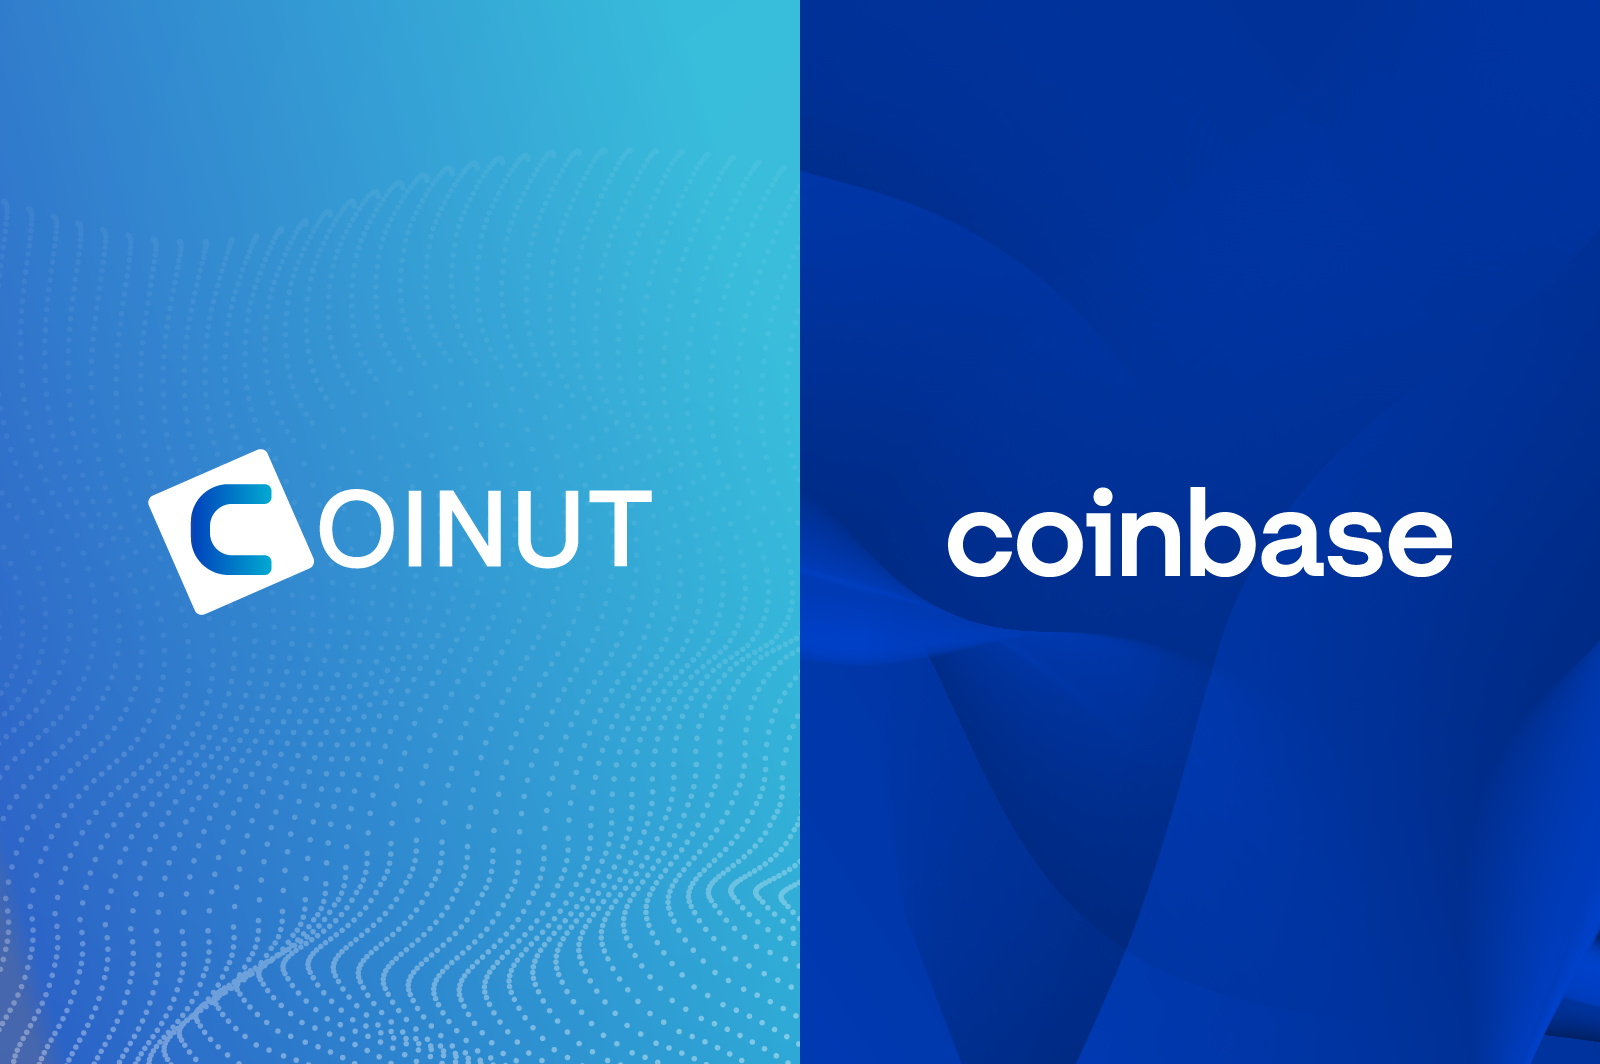 Crypto exchange Coinut selects Coinbase Custody to securely store and insure users’ digital assets